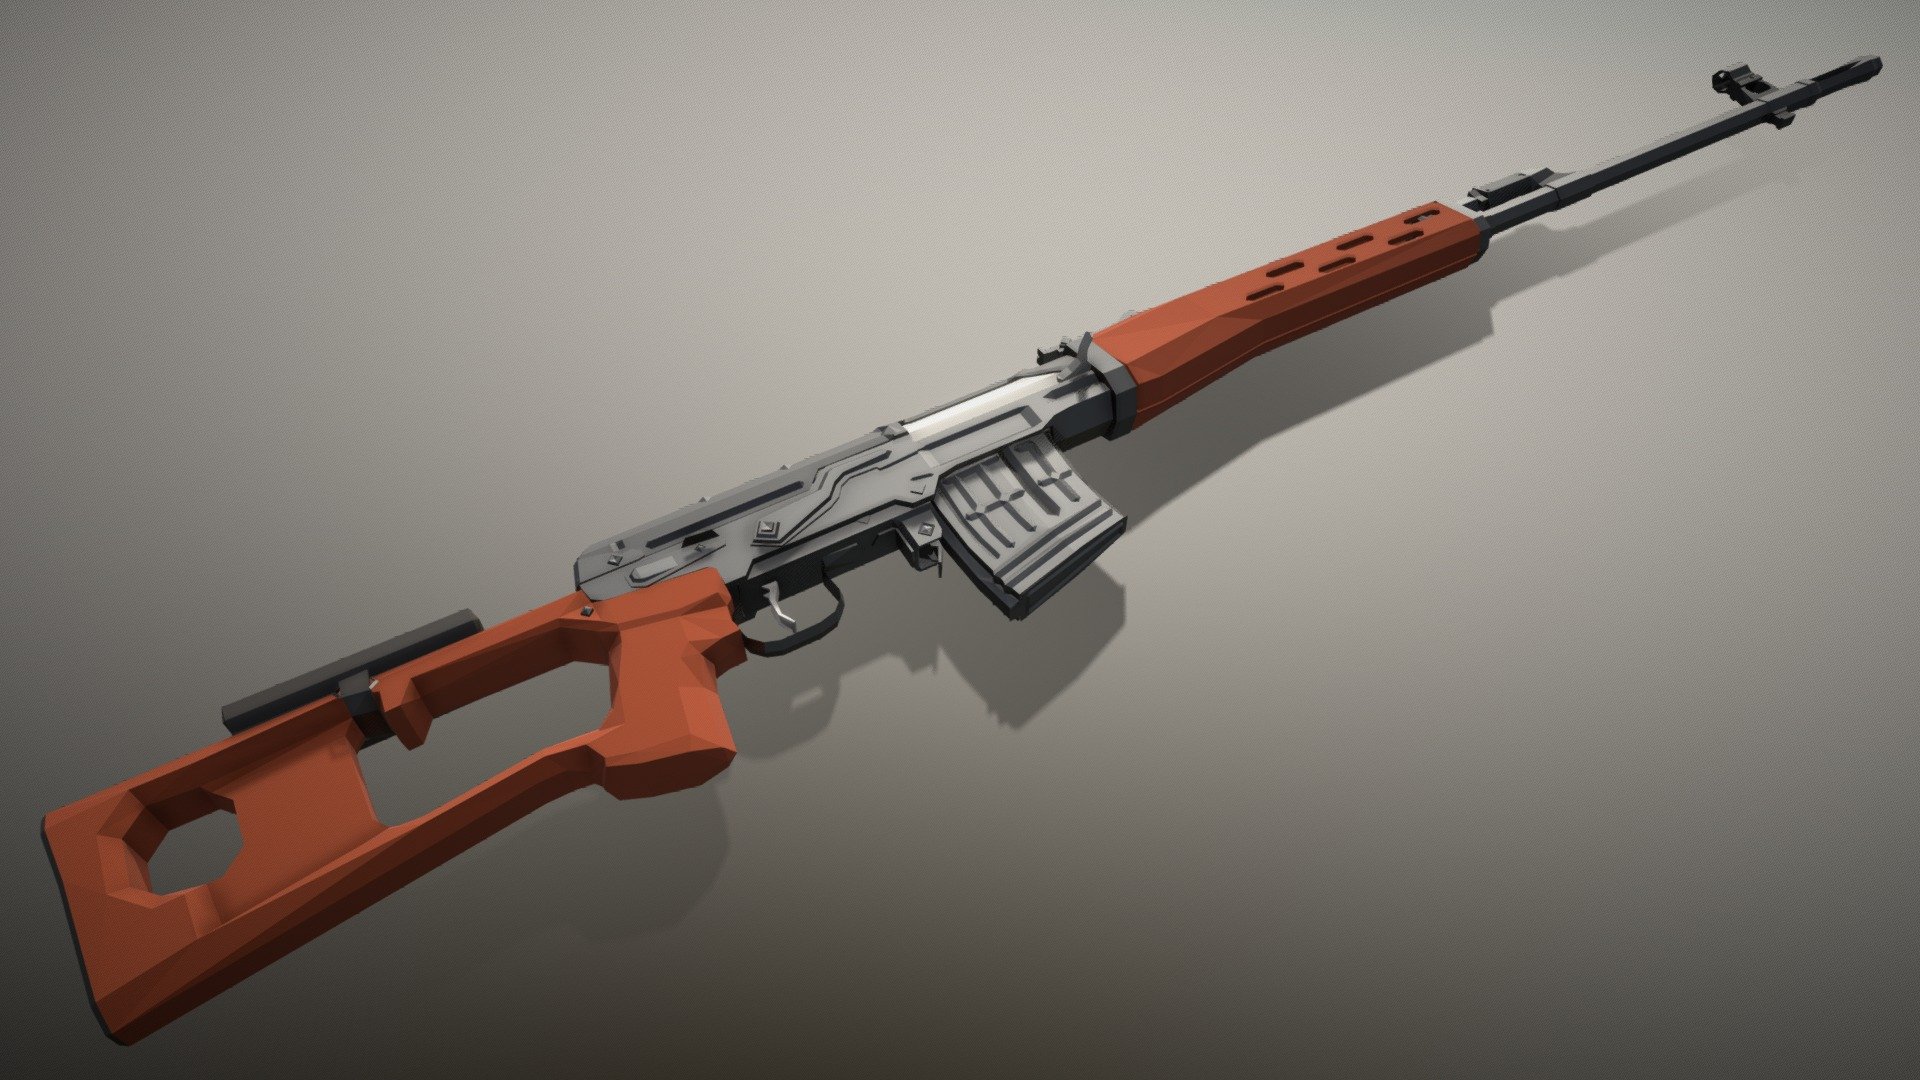 Low-Poly model of the Dragunov SVD, a designated marksman's rifle developed by Yevgeny Dragunov in the late 50s-early 60s upon request of the russian military. While the rifle utilizes many manufacturing techniques also used for the AK, it functions very differently, being operated by a long-stroke gas piston and locked by a three-lug rotating bolt.

04/01/23:
added attachment rail - Low-Poly Dragunov SVD - Download Free 3D model by notcplkerry 3d model